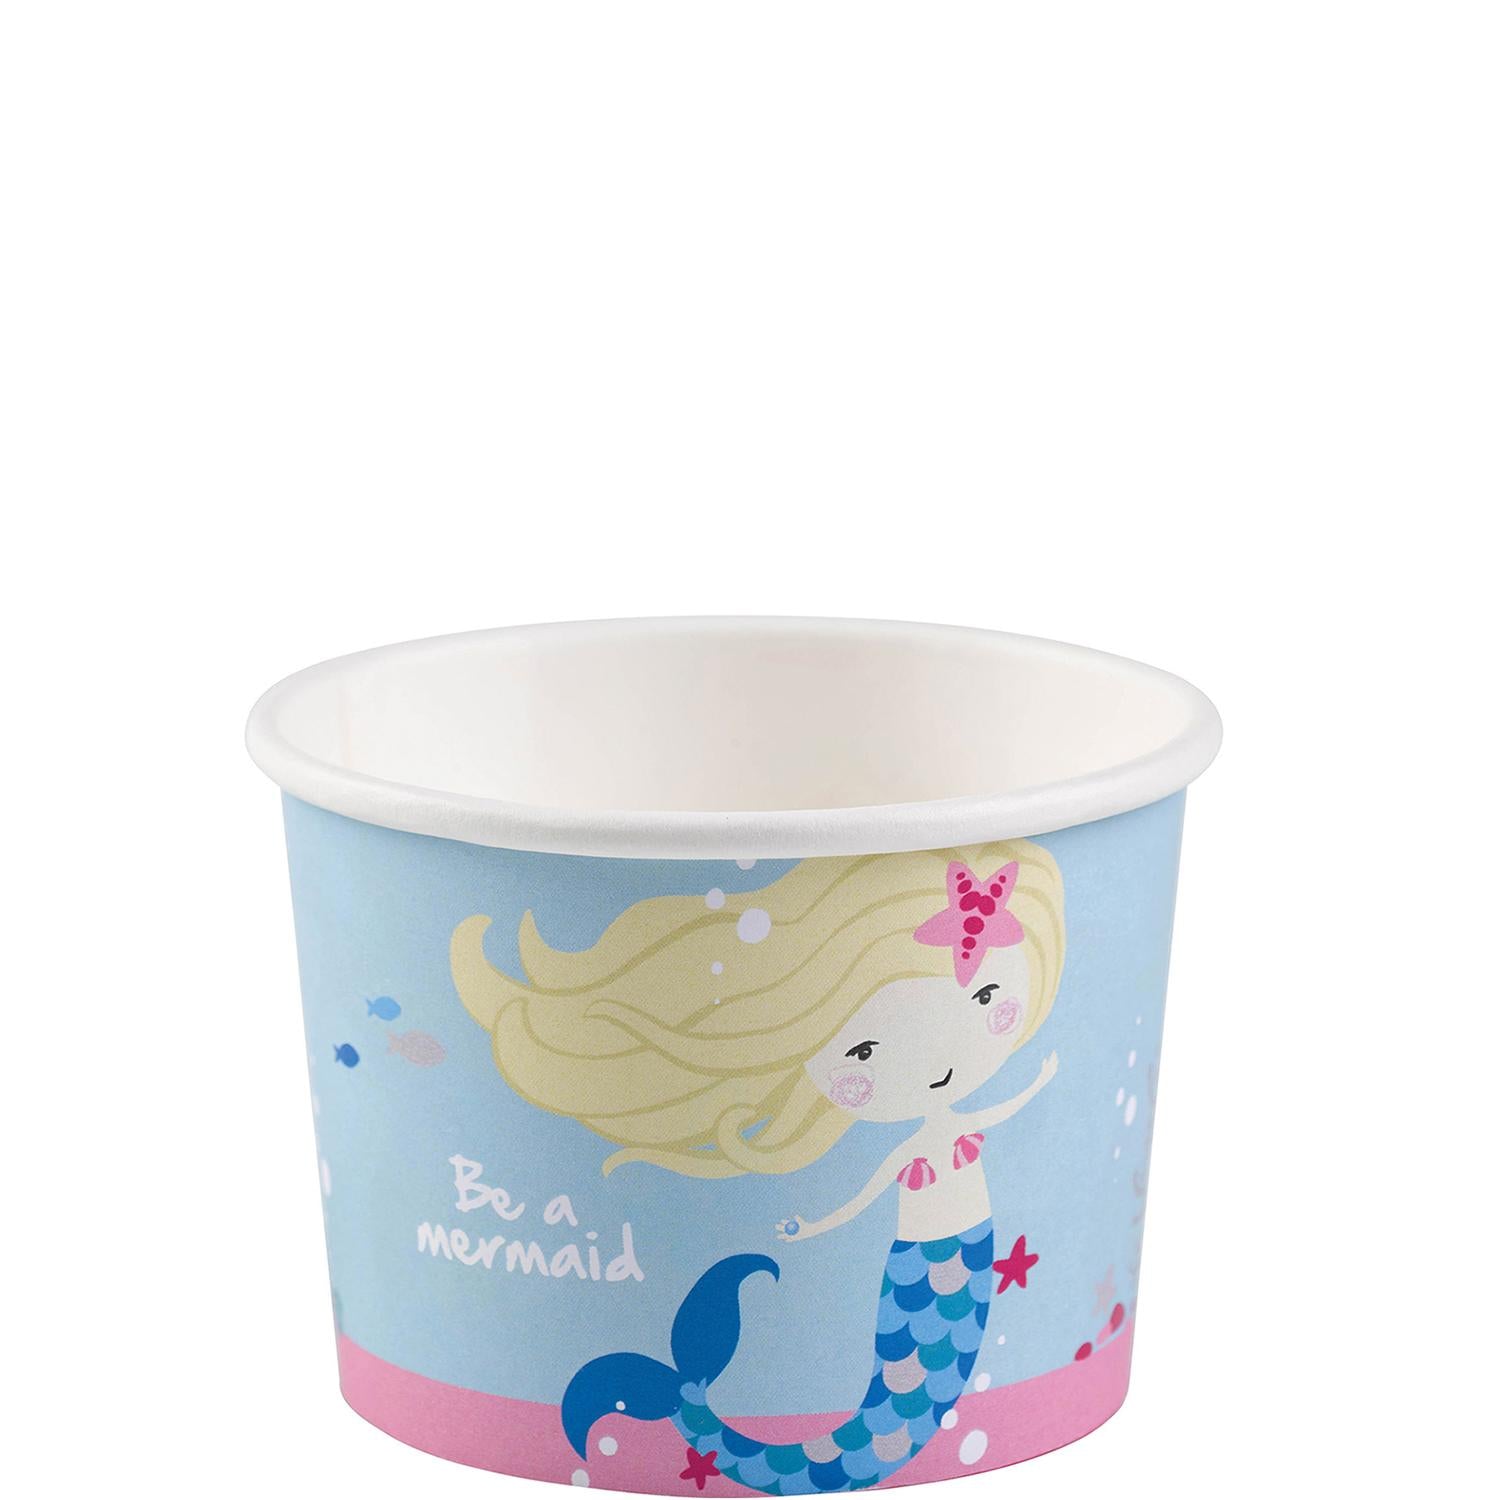 Be A Mermaid Ice Cream Bowls 9oz, 8pcs Printed Tableware - Party Centre